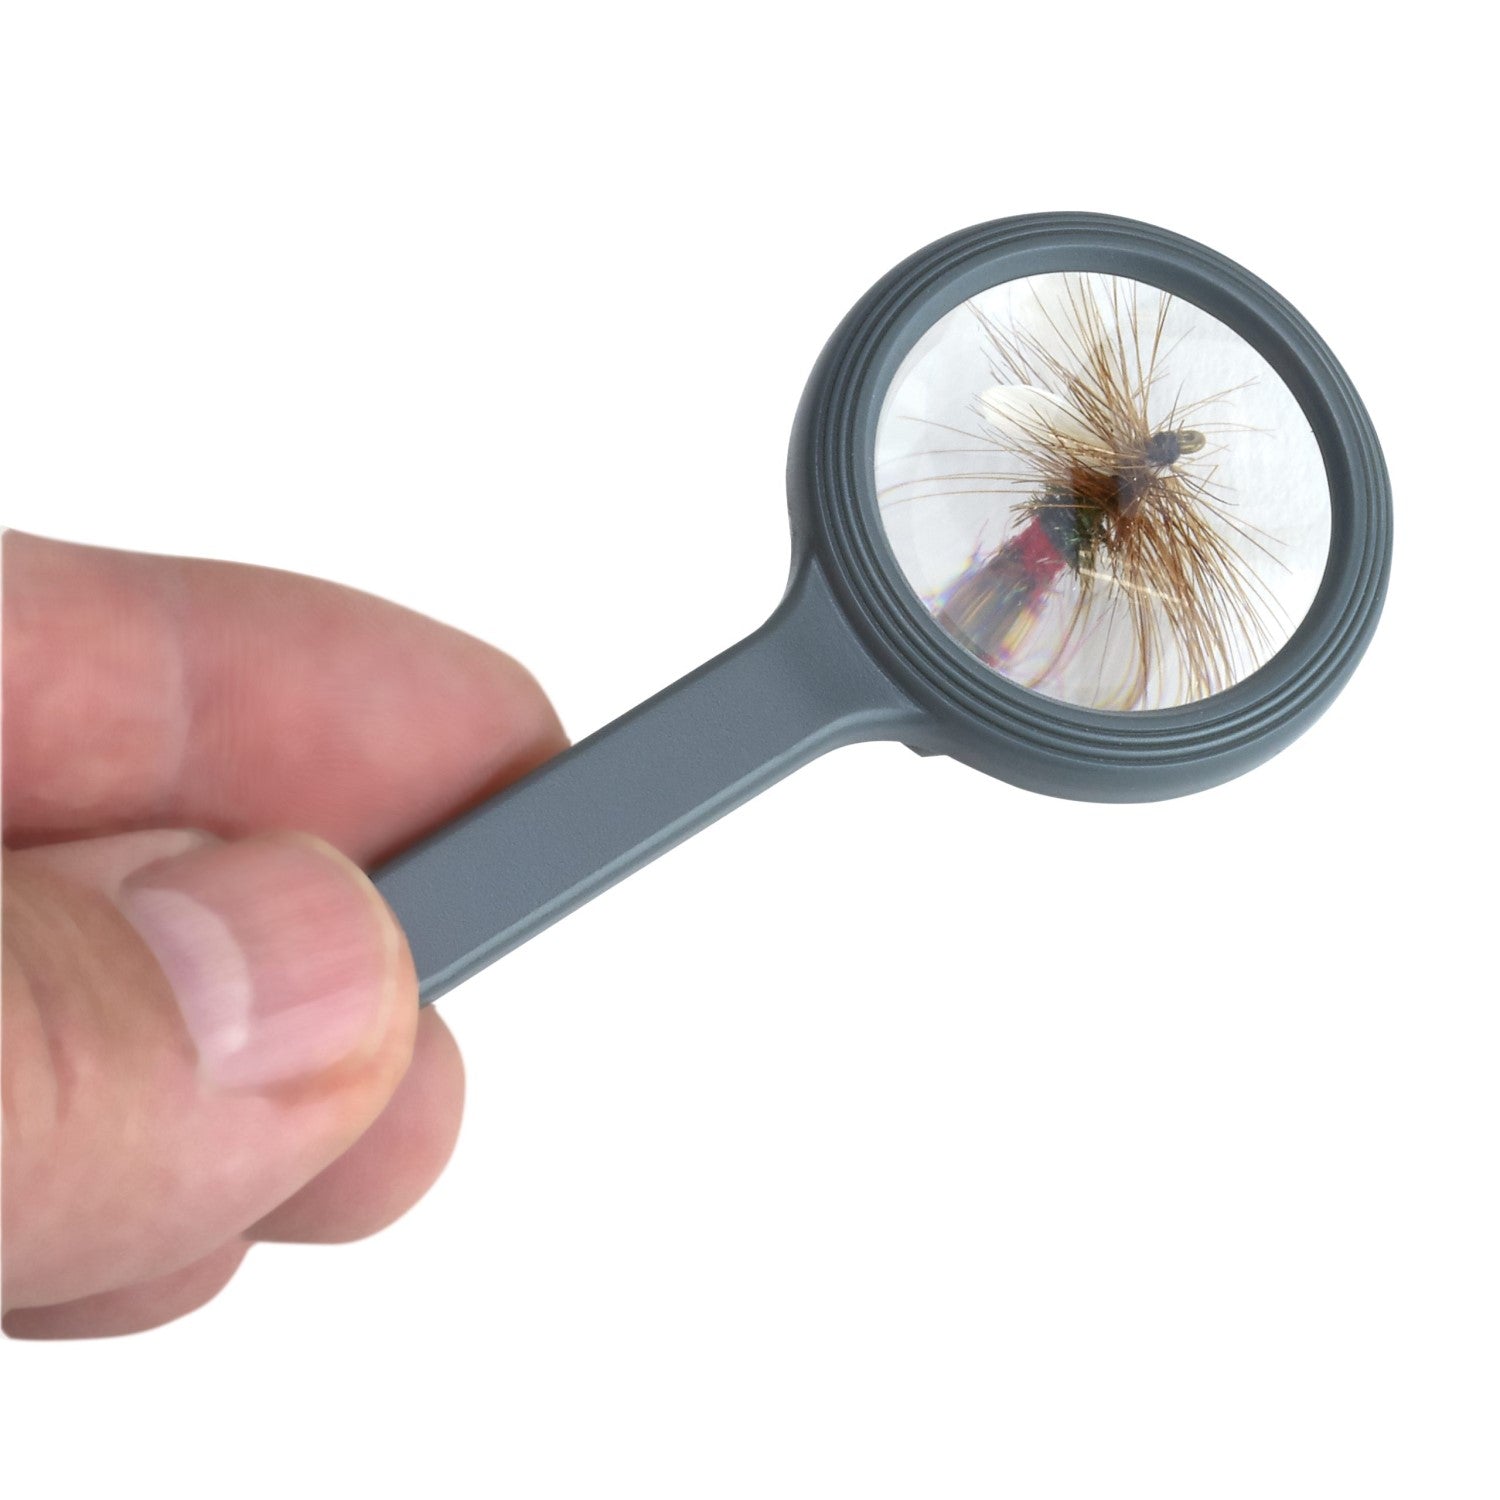 Image of the magnifier on the Fish'n Grip.